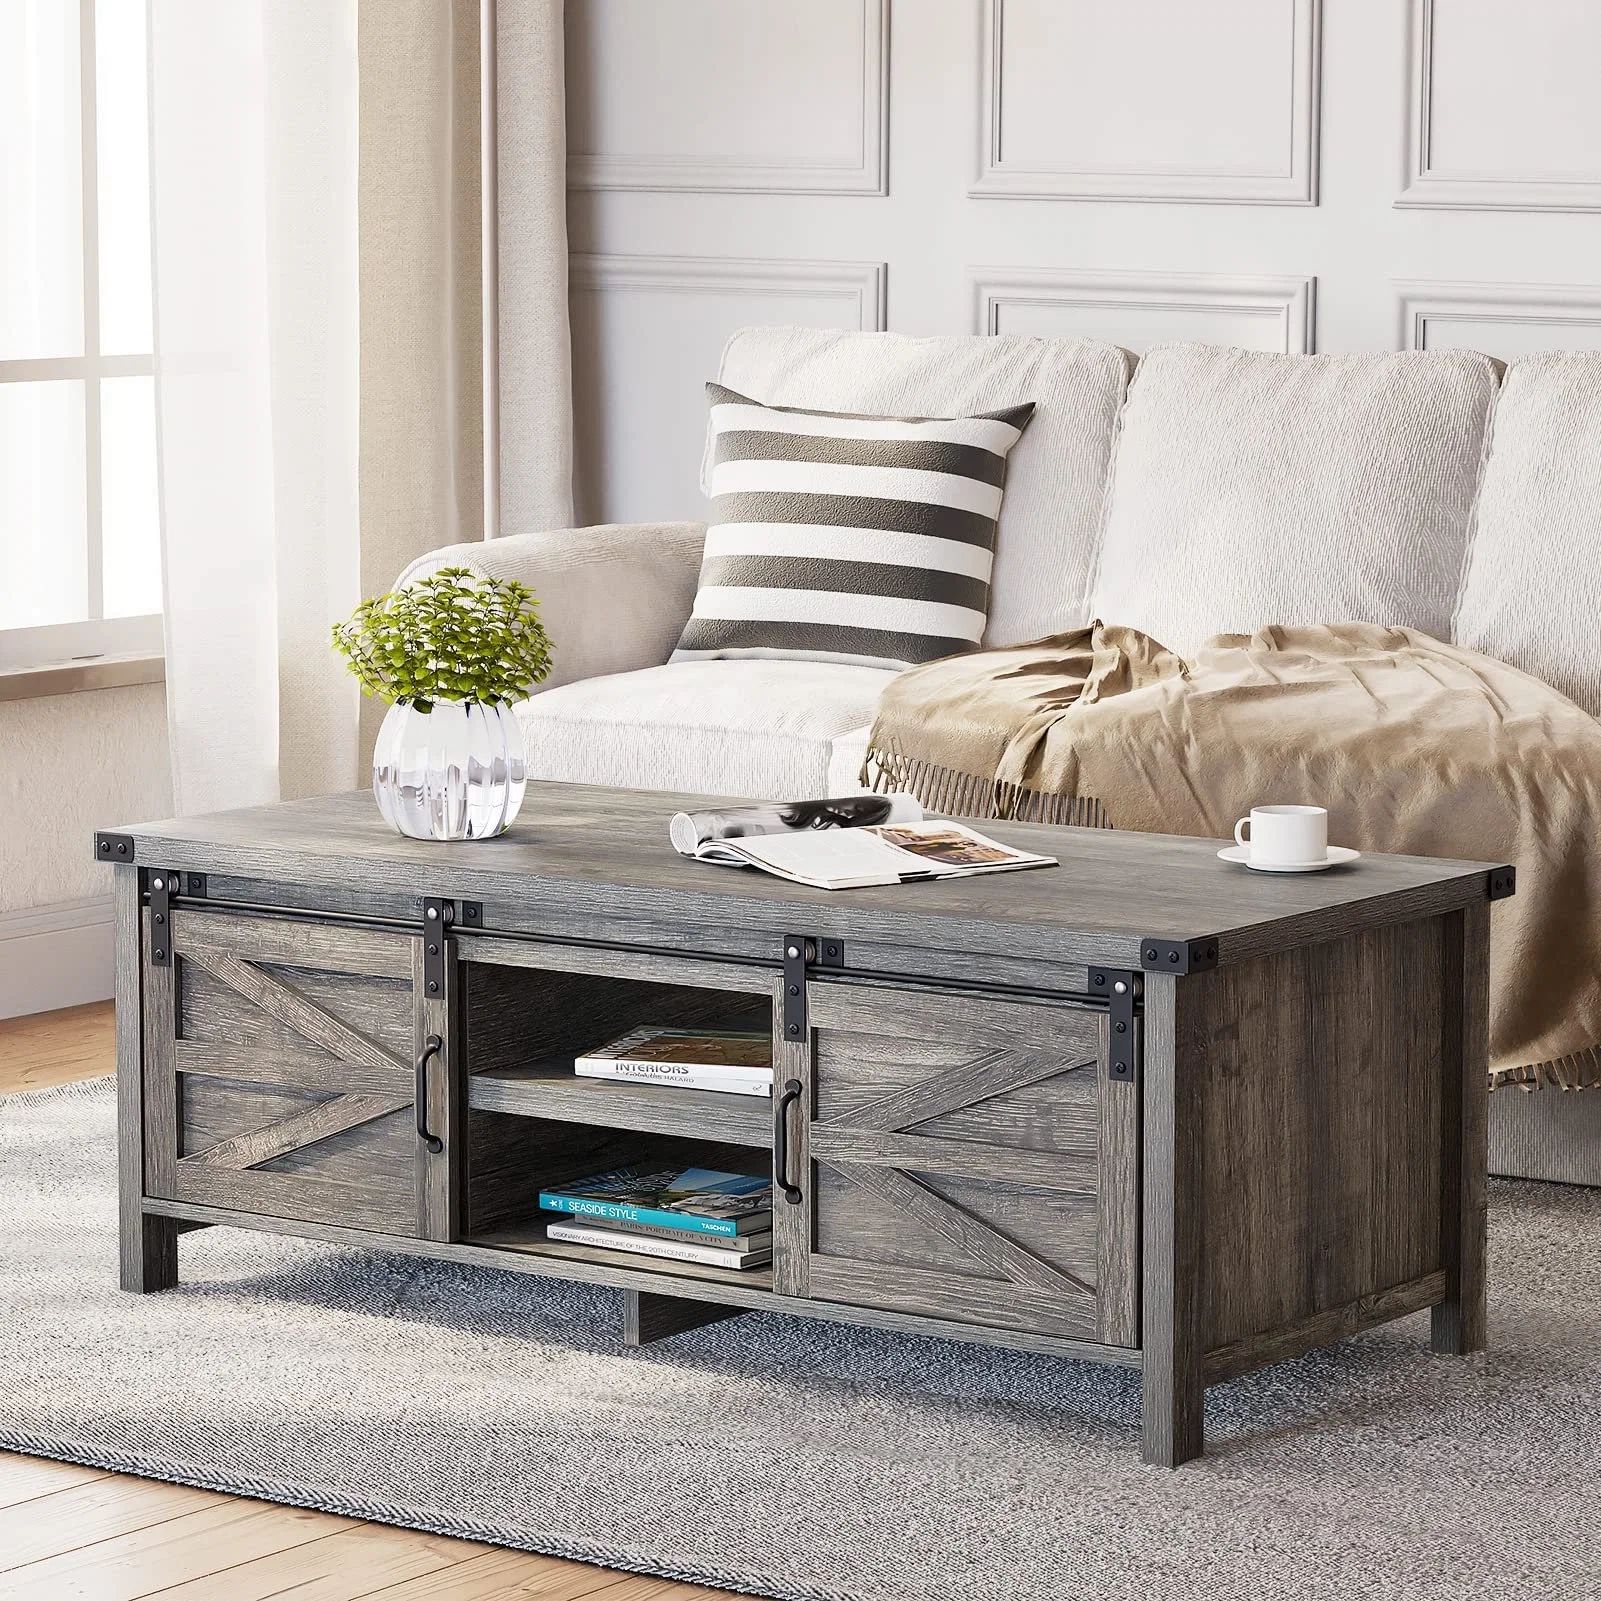 Wood Coffee Table With Storage, Rustic Center Rectangular Tables For Living  Room, W/sliding Barn Doors & Storage Cabinet Shelves, For Bedroom, Office,  – China Coffee Table, Barn Doors Coffee Table | Made In China Inside Simple Design Coffee Tables (Photo 11 of 15)